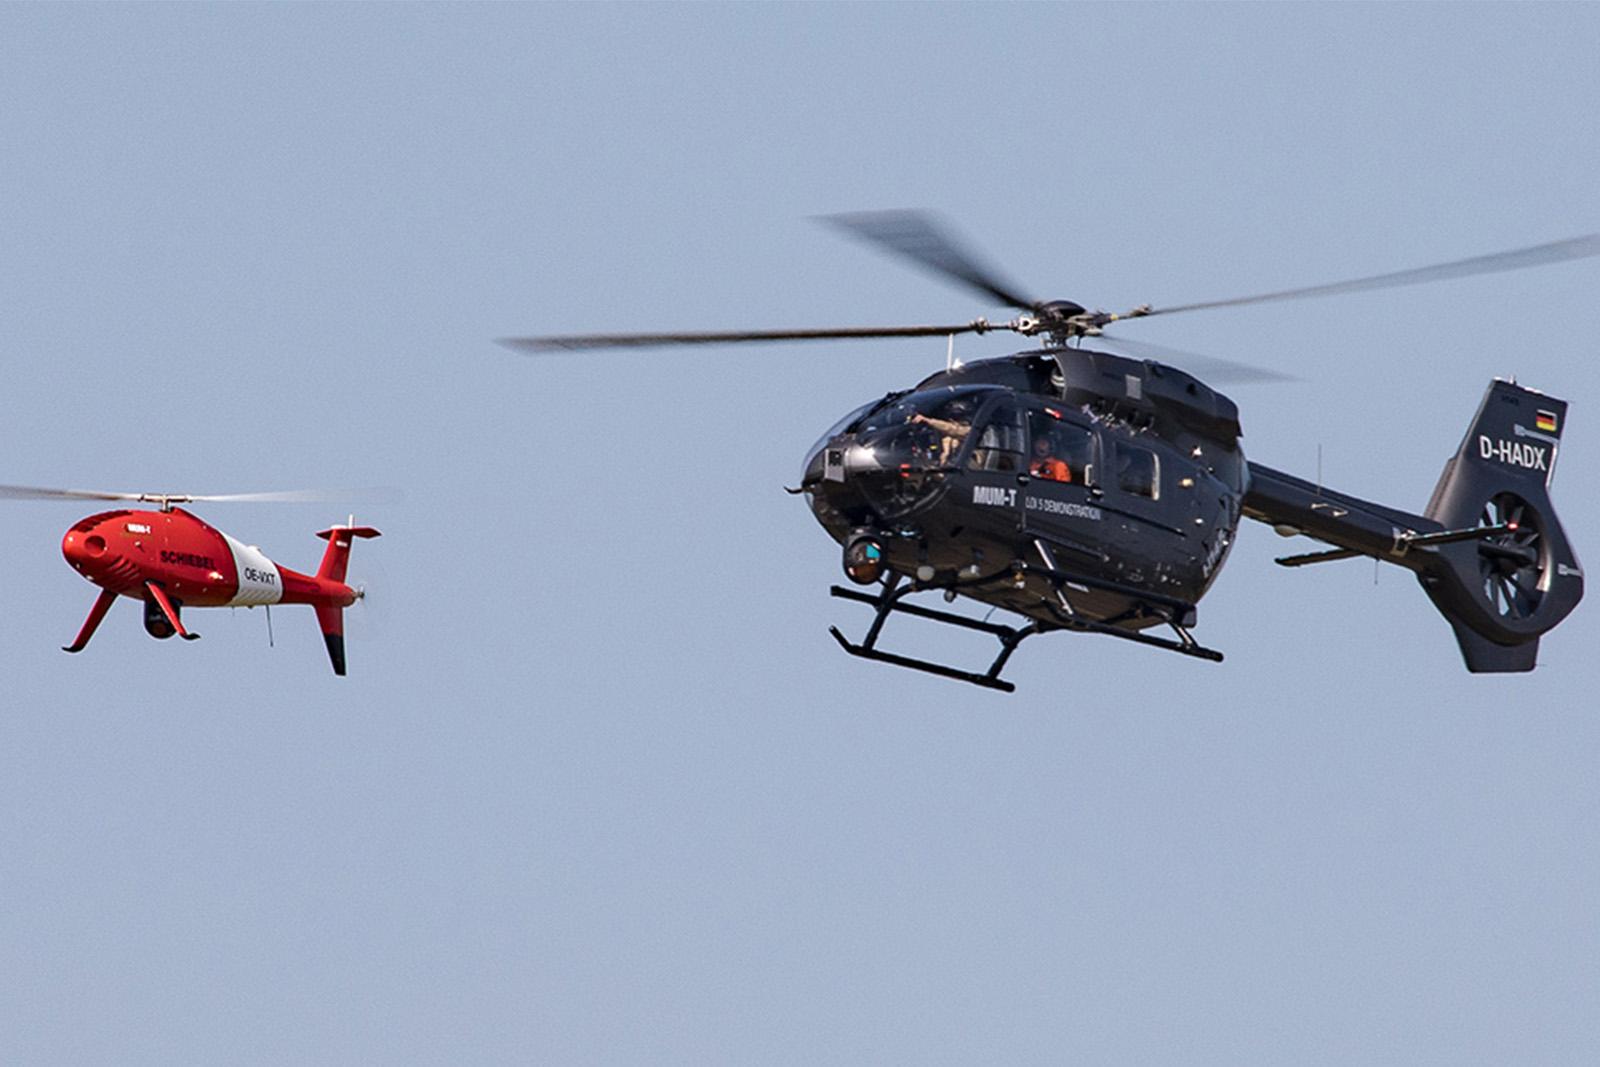 H145 and S-100 in aerial tests.